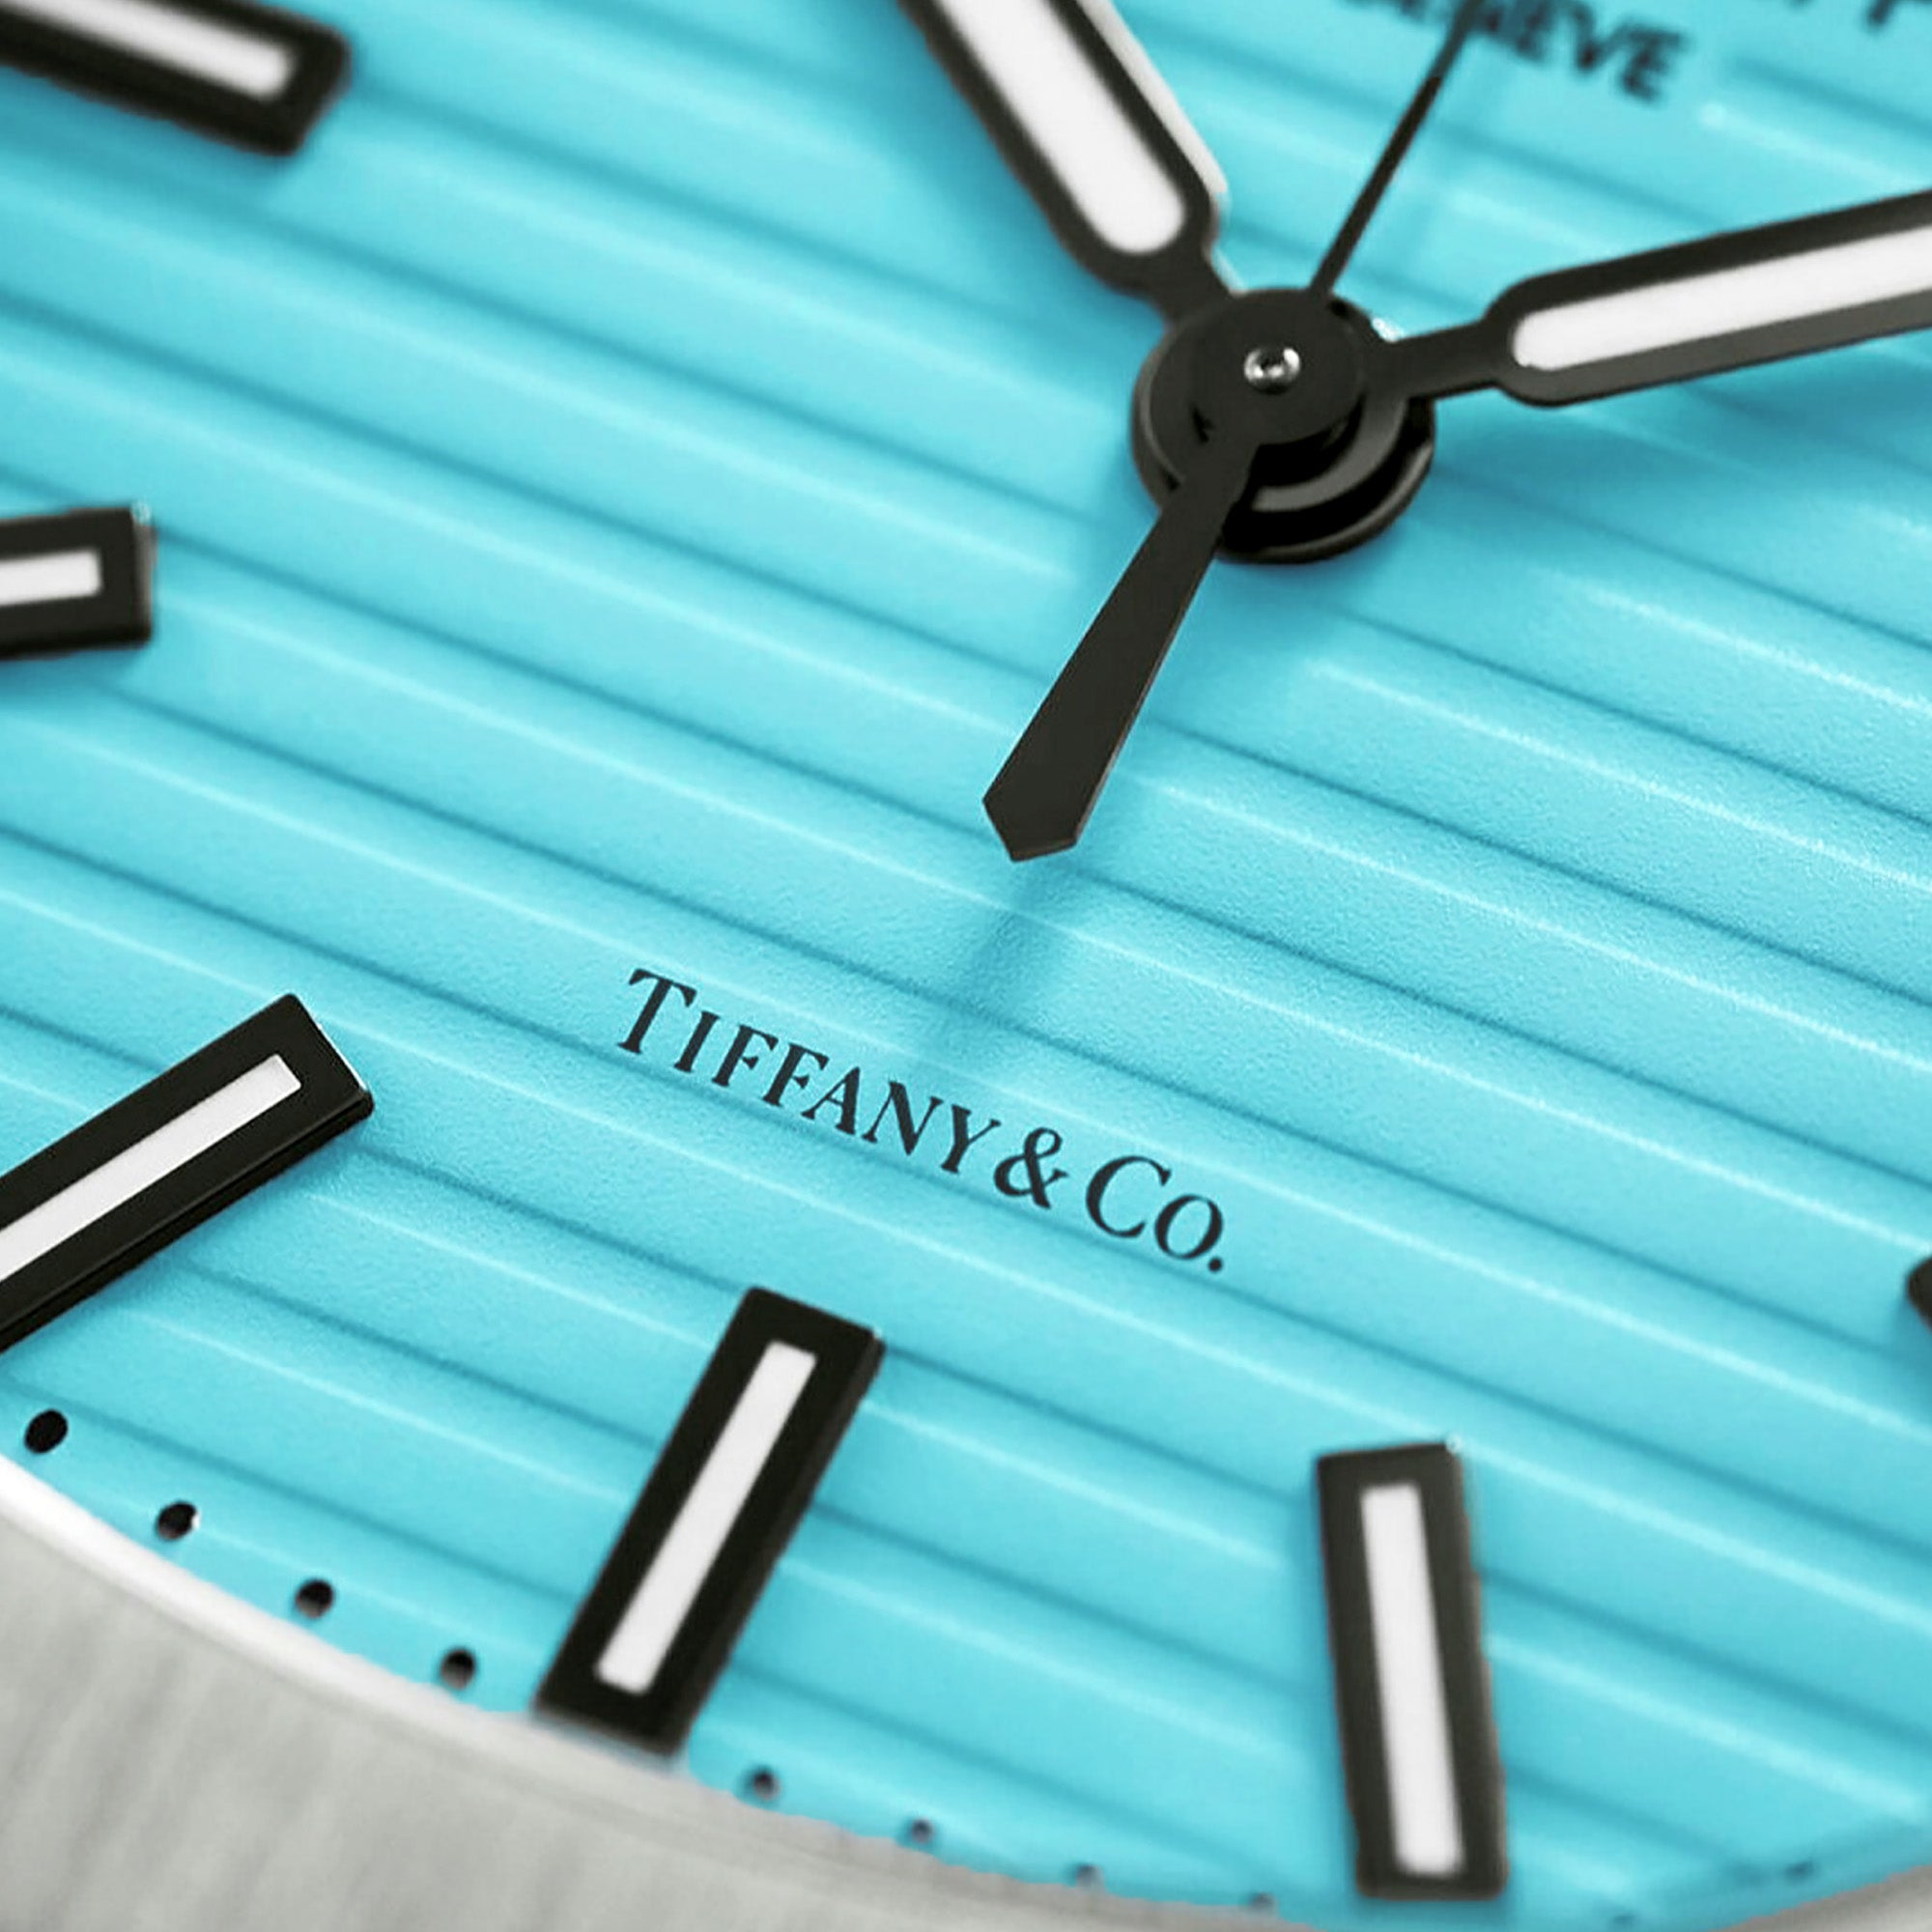 Tiffany in watchmaking history, Time and Watches